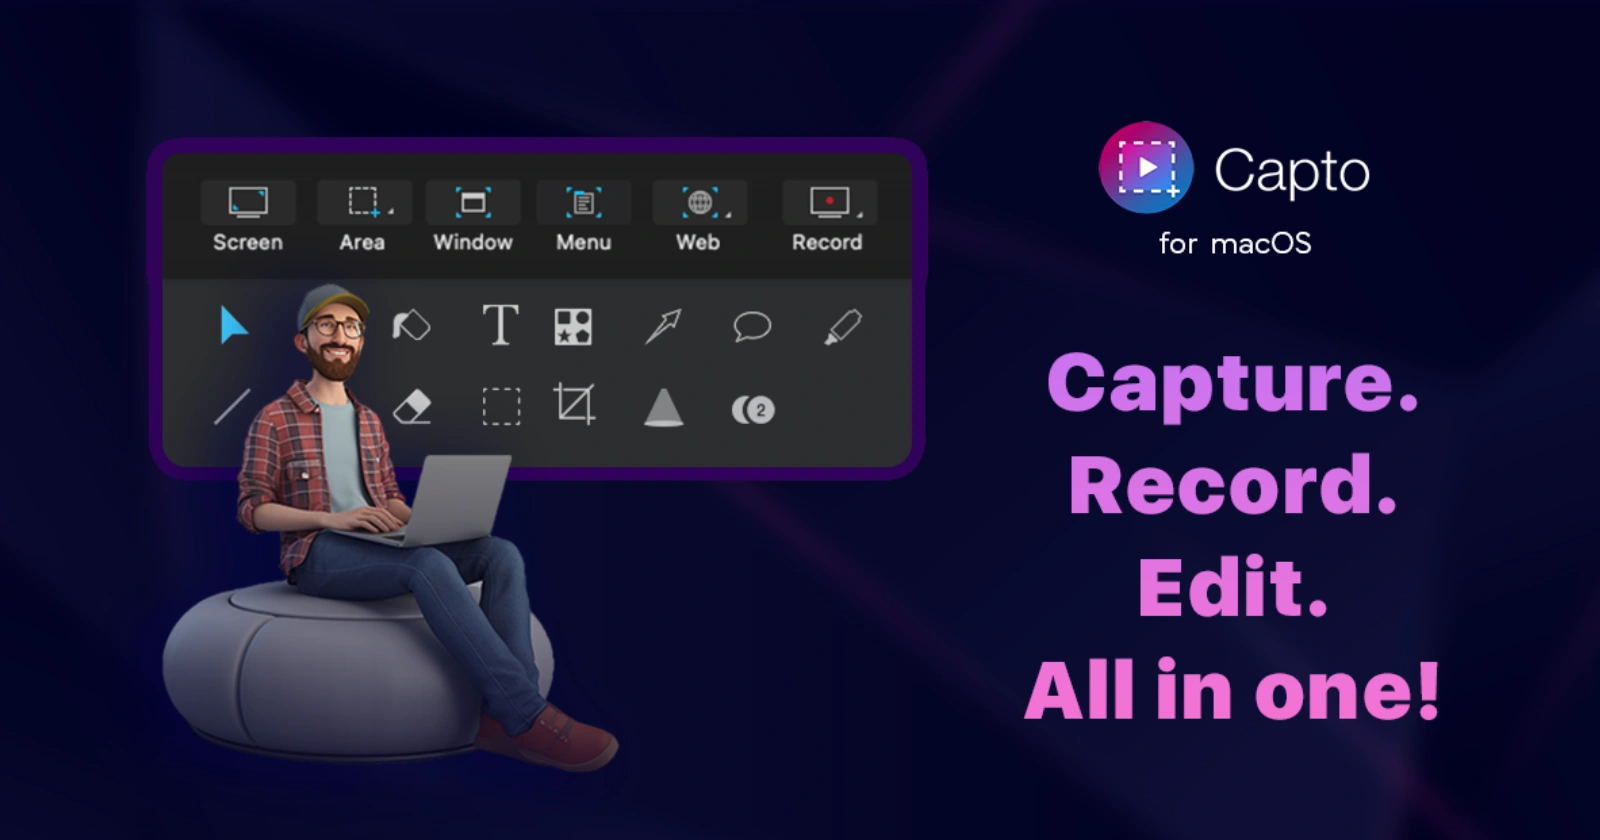 Capto is a one-stop solution for screen recording and editing on Mac